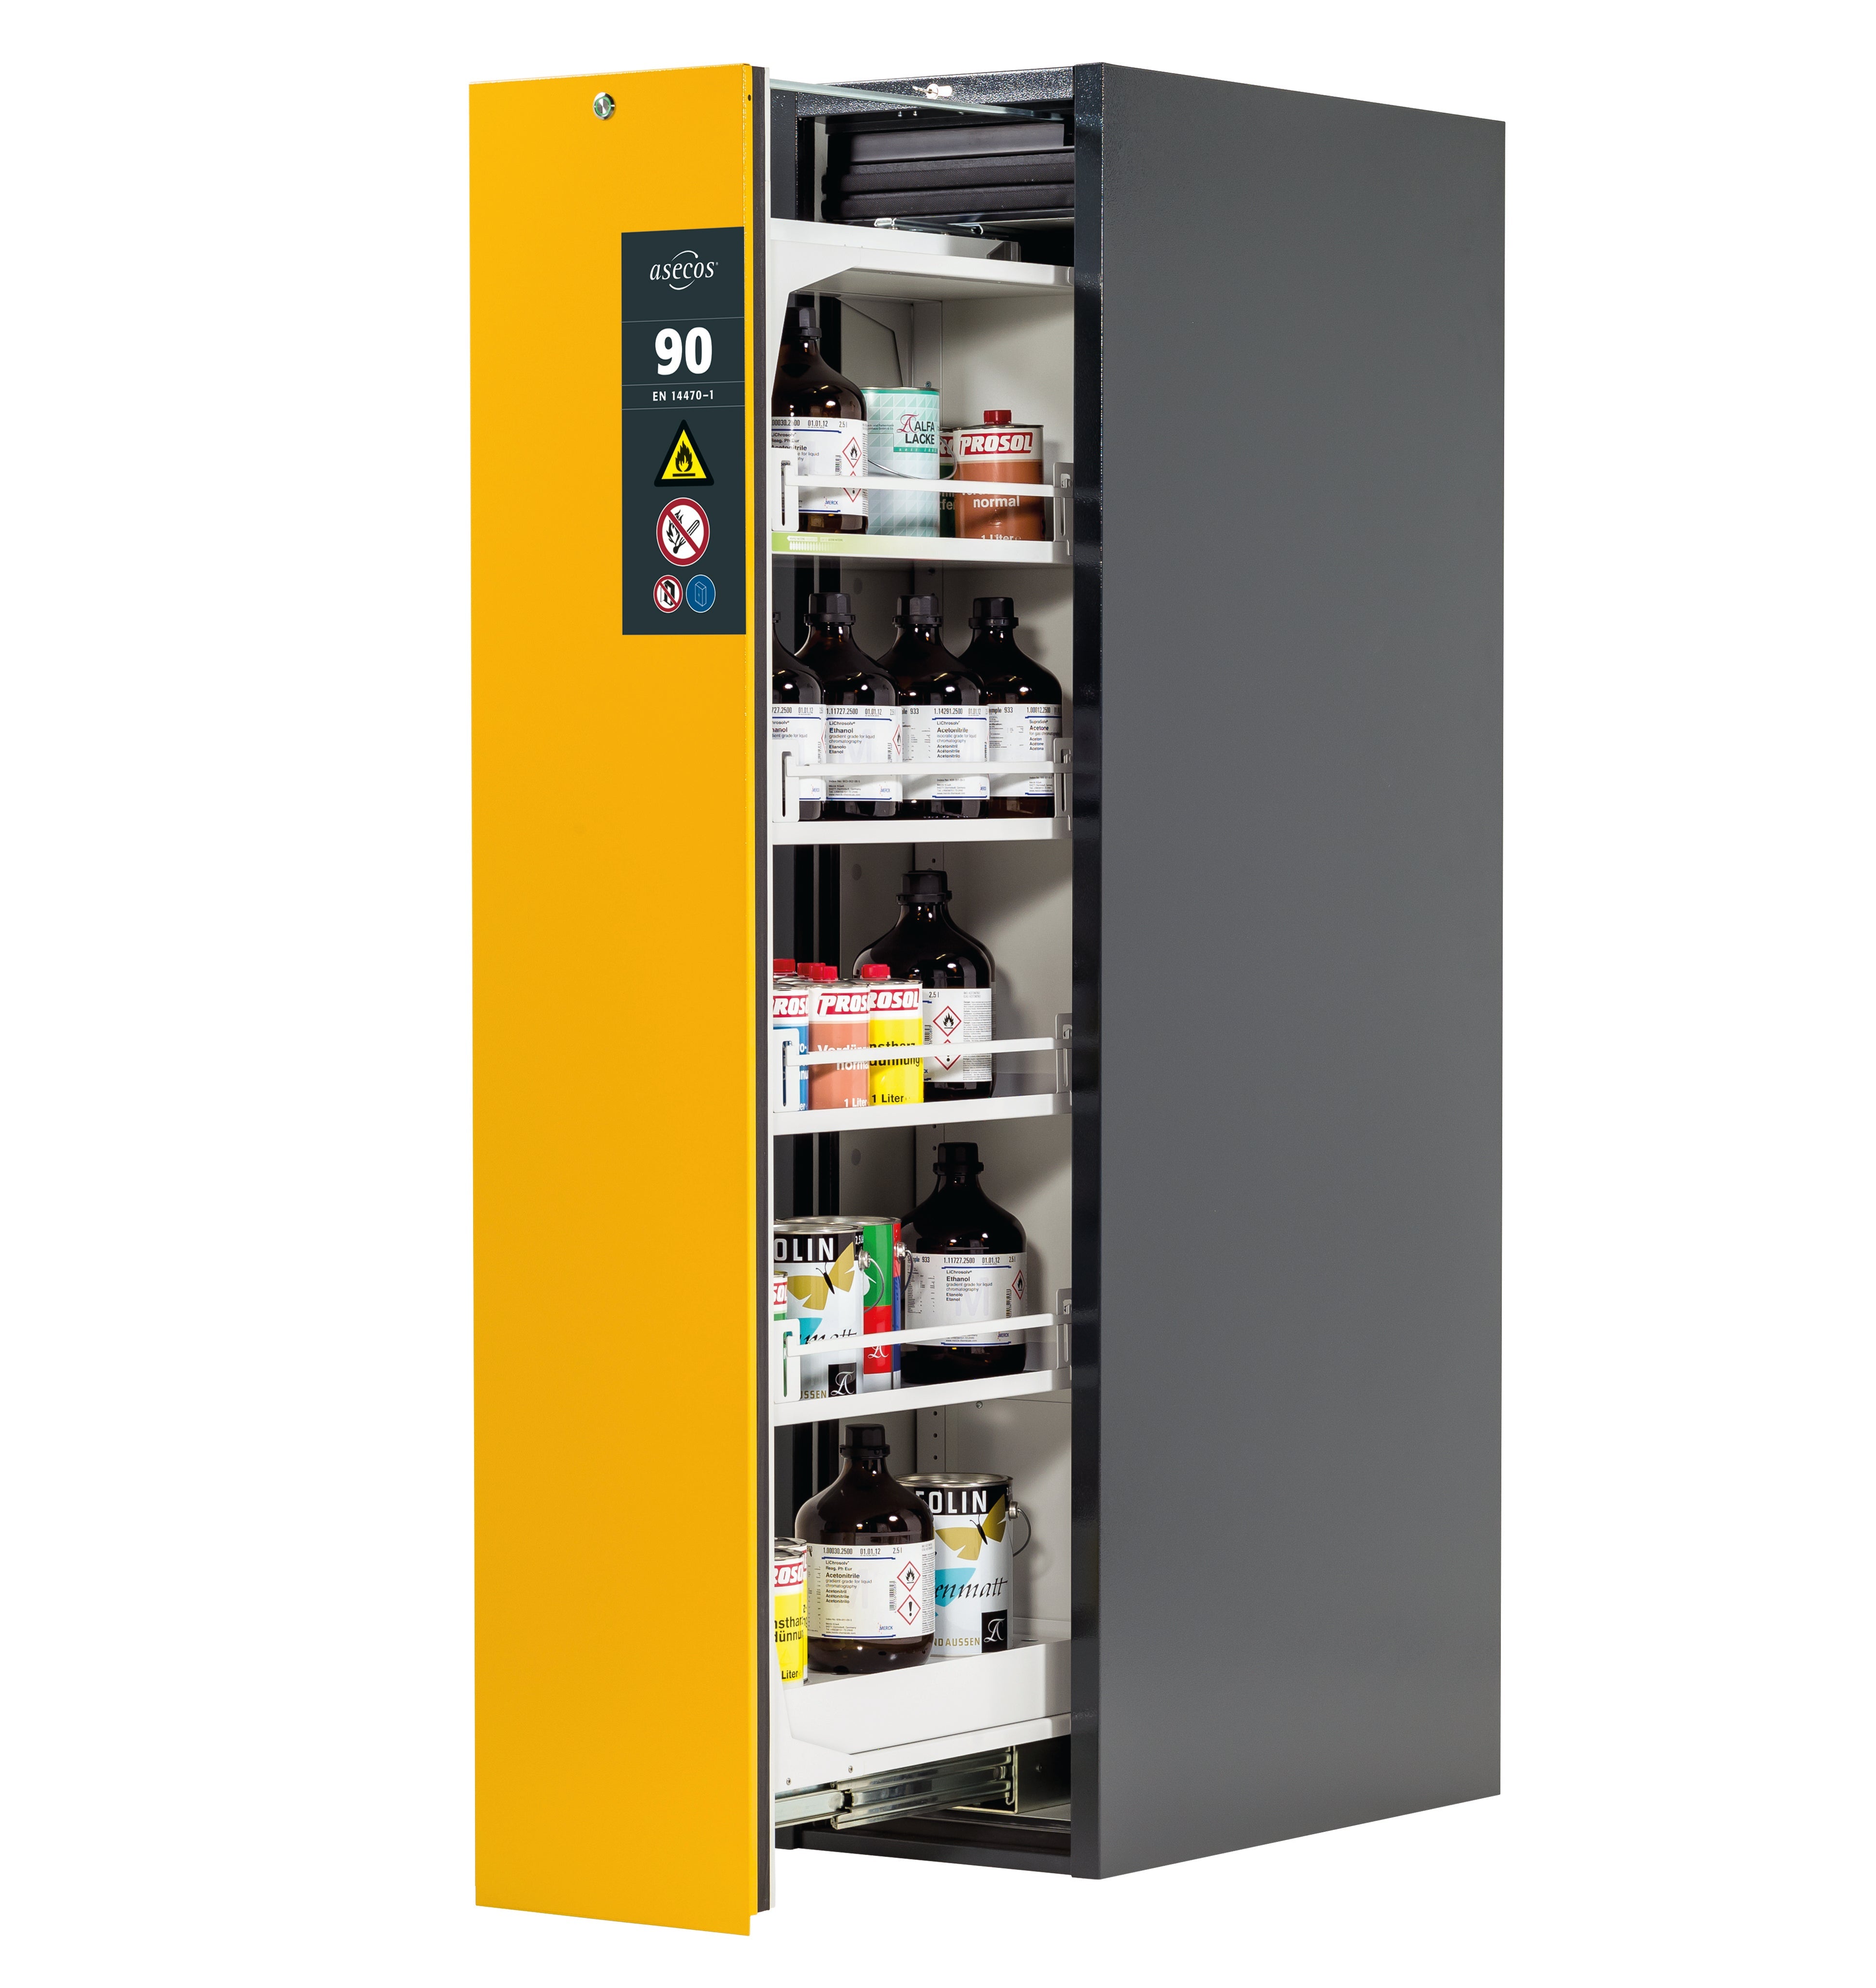 Type 90 safety cabinet V-MOVE-90 model V90.196.045.VDAC:0013 in safety yellow RAL 1004 with 4x standard shelves (sheet steel)